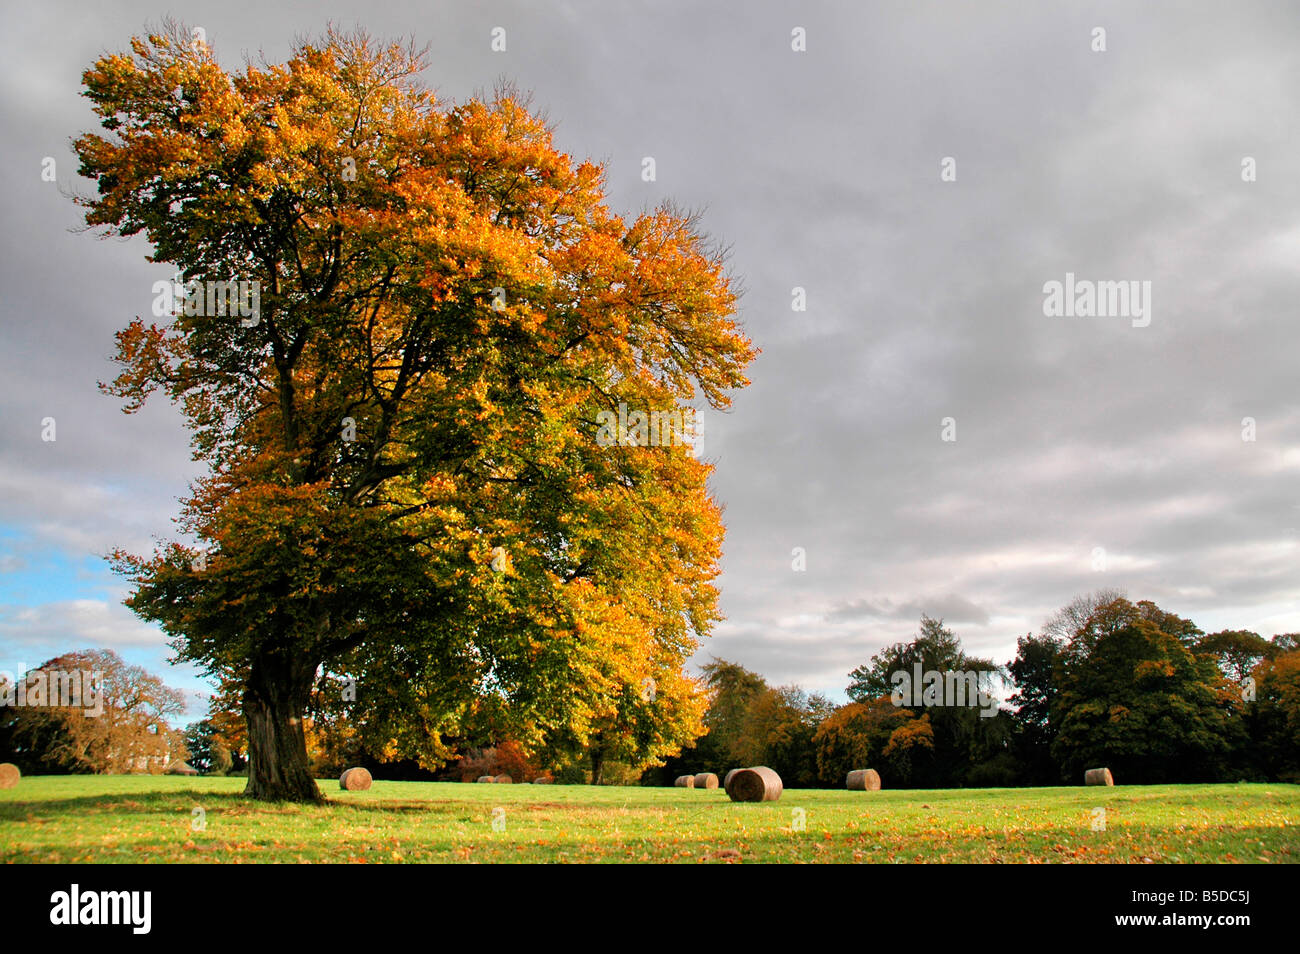 Huge sunlit autumn tree in a field of hay bales. Stock Photo